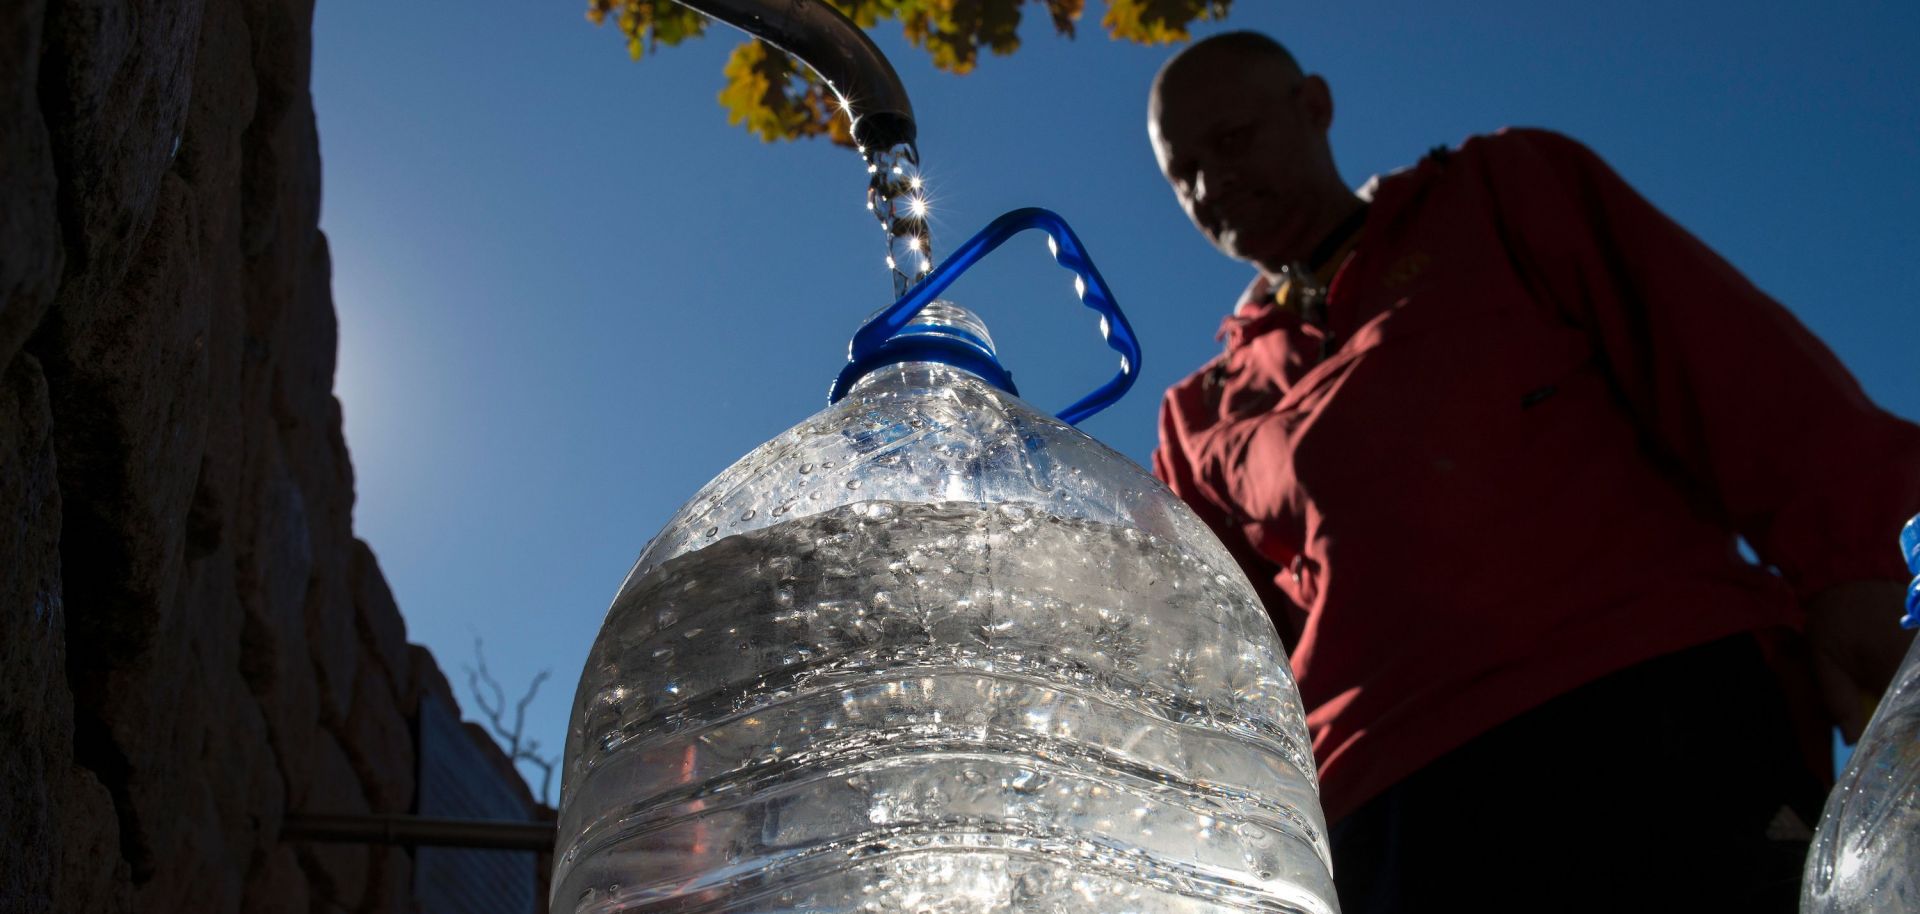 A man fills a plastic jug with drinking water from a spring-fed tap in Cape Town, South Africa. Prolonged drought conditions have put the city in danger of running out of water.  